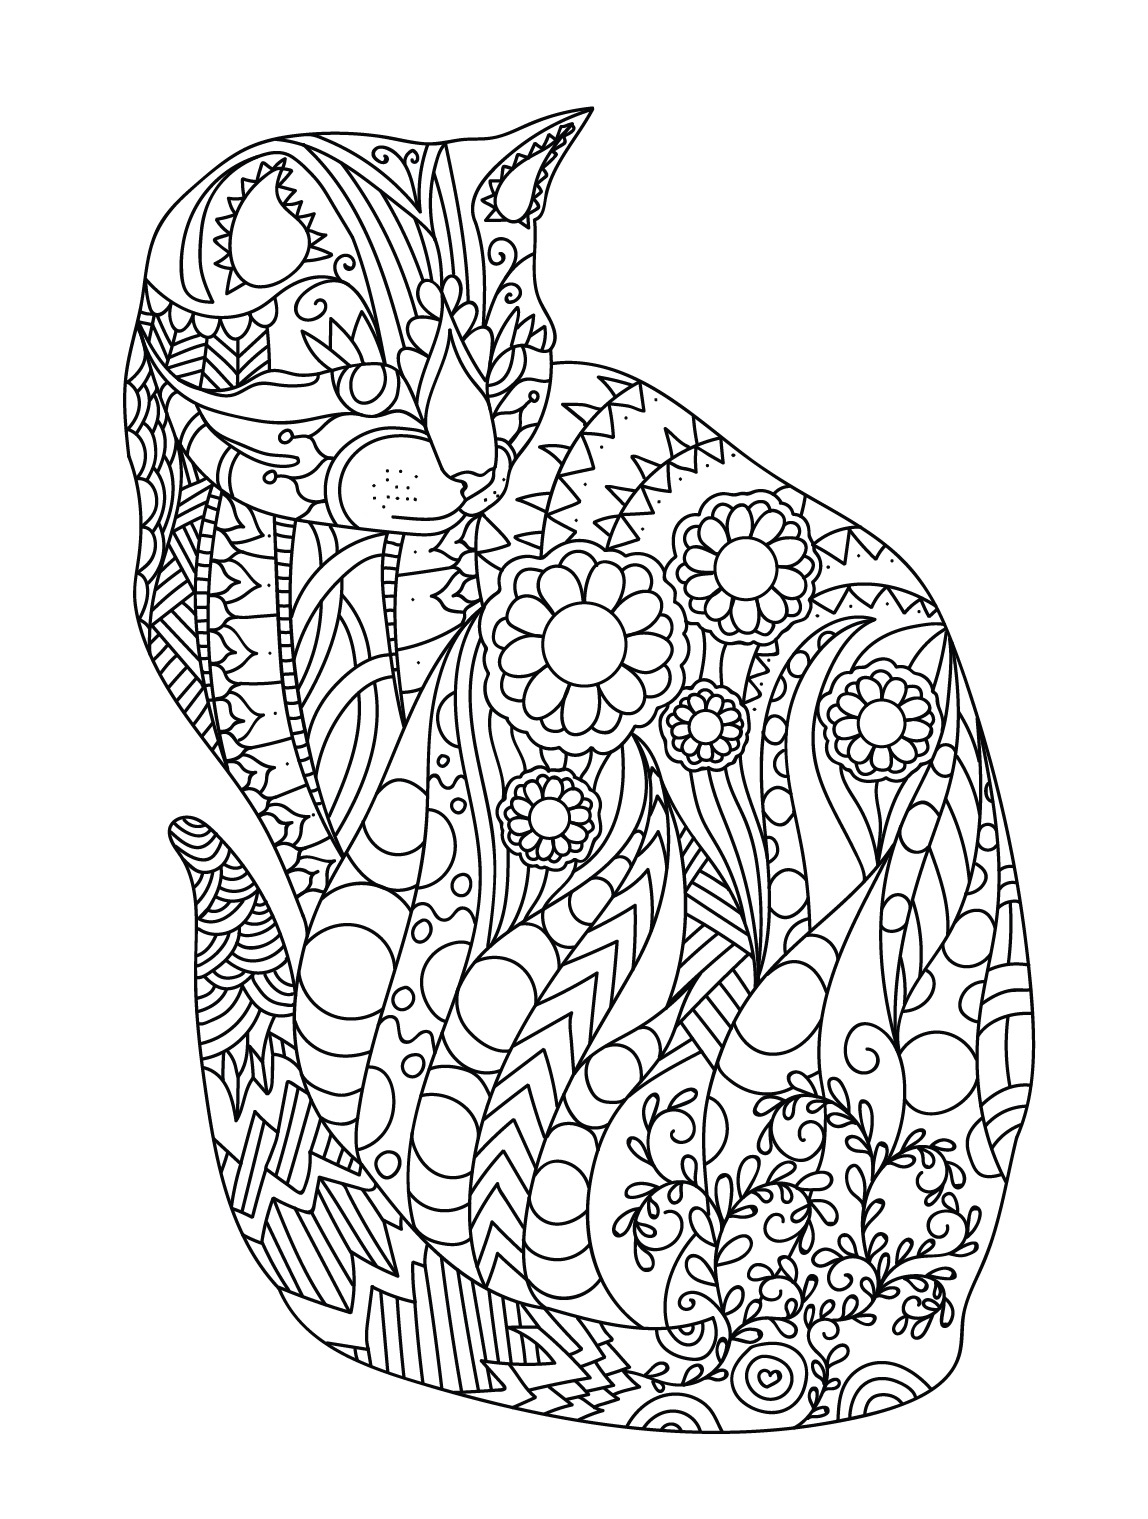 49 Zentangle Animals: The Easiest Templates to Start in 2021 - Craftwhack